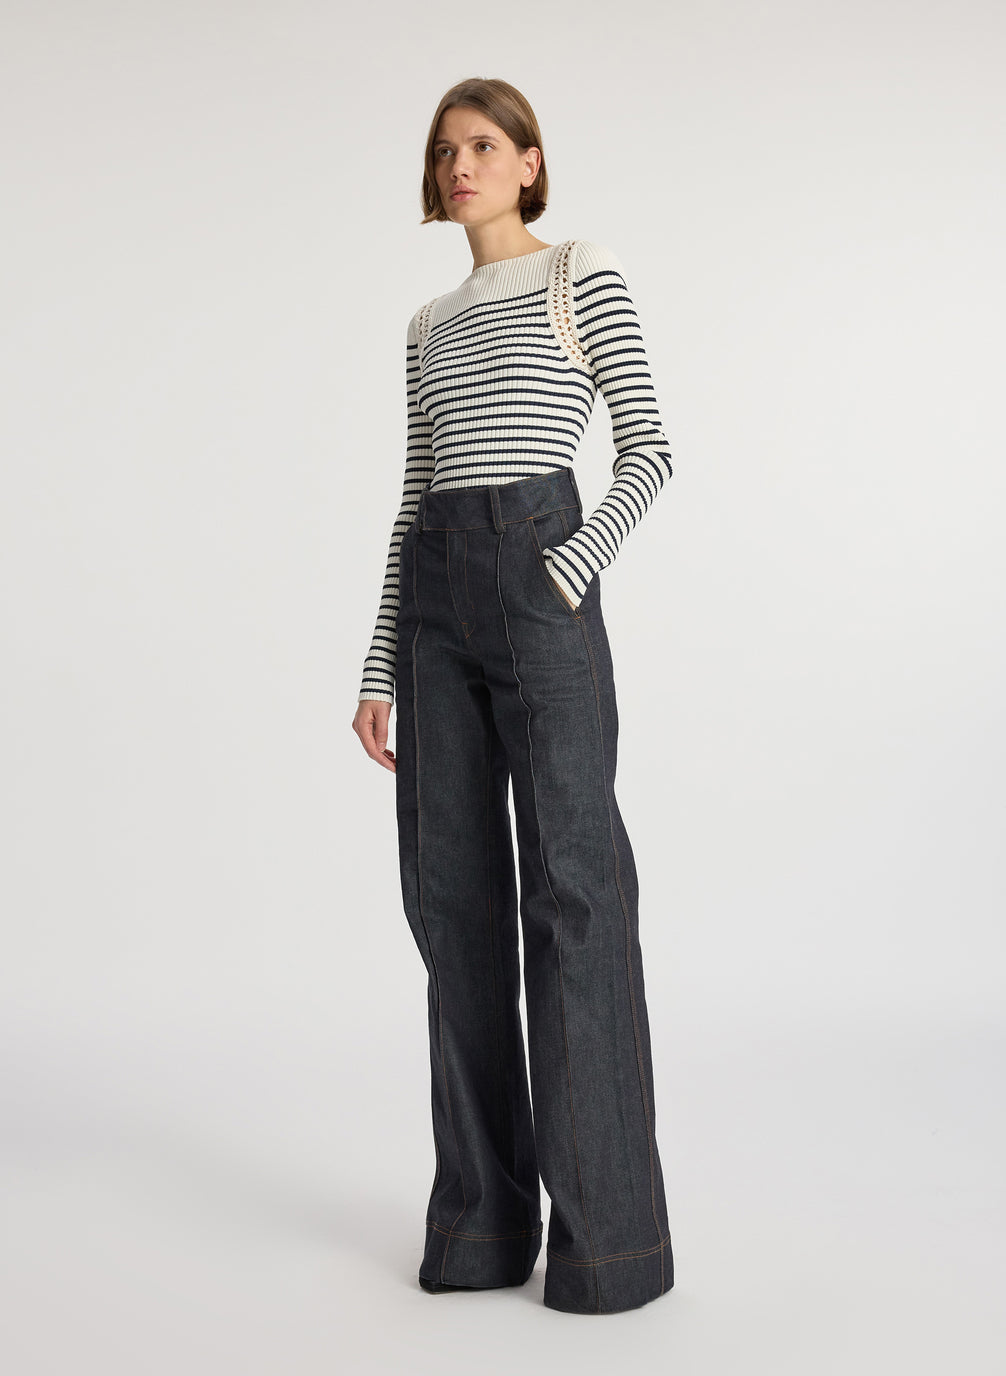 side view of woman wearing white and navy striped top with long bell sleeves and dark wash raw denim jeans